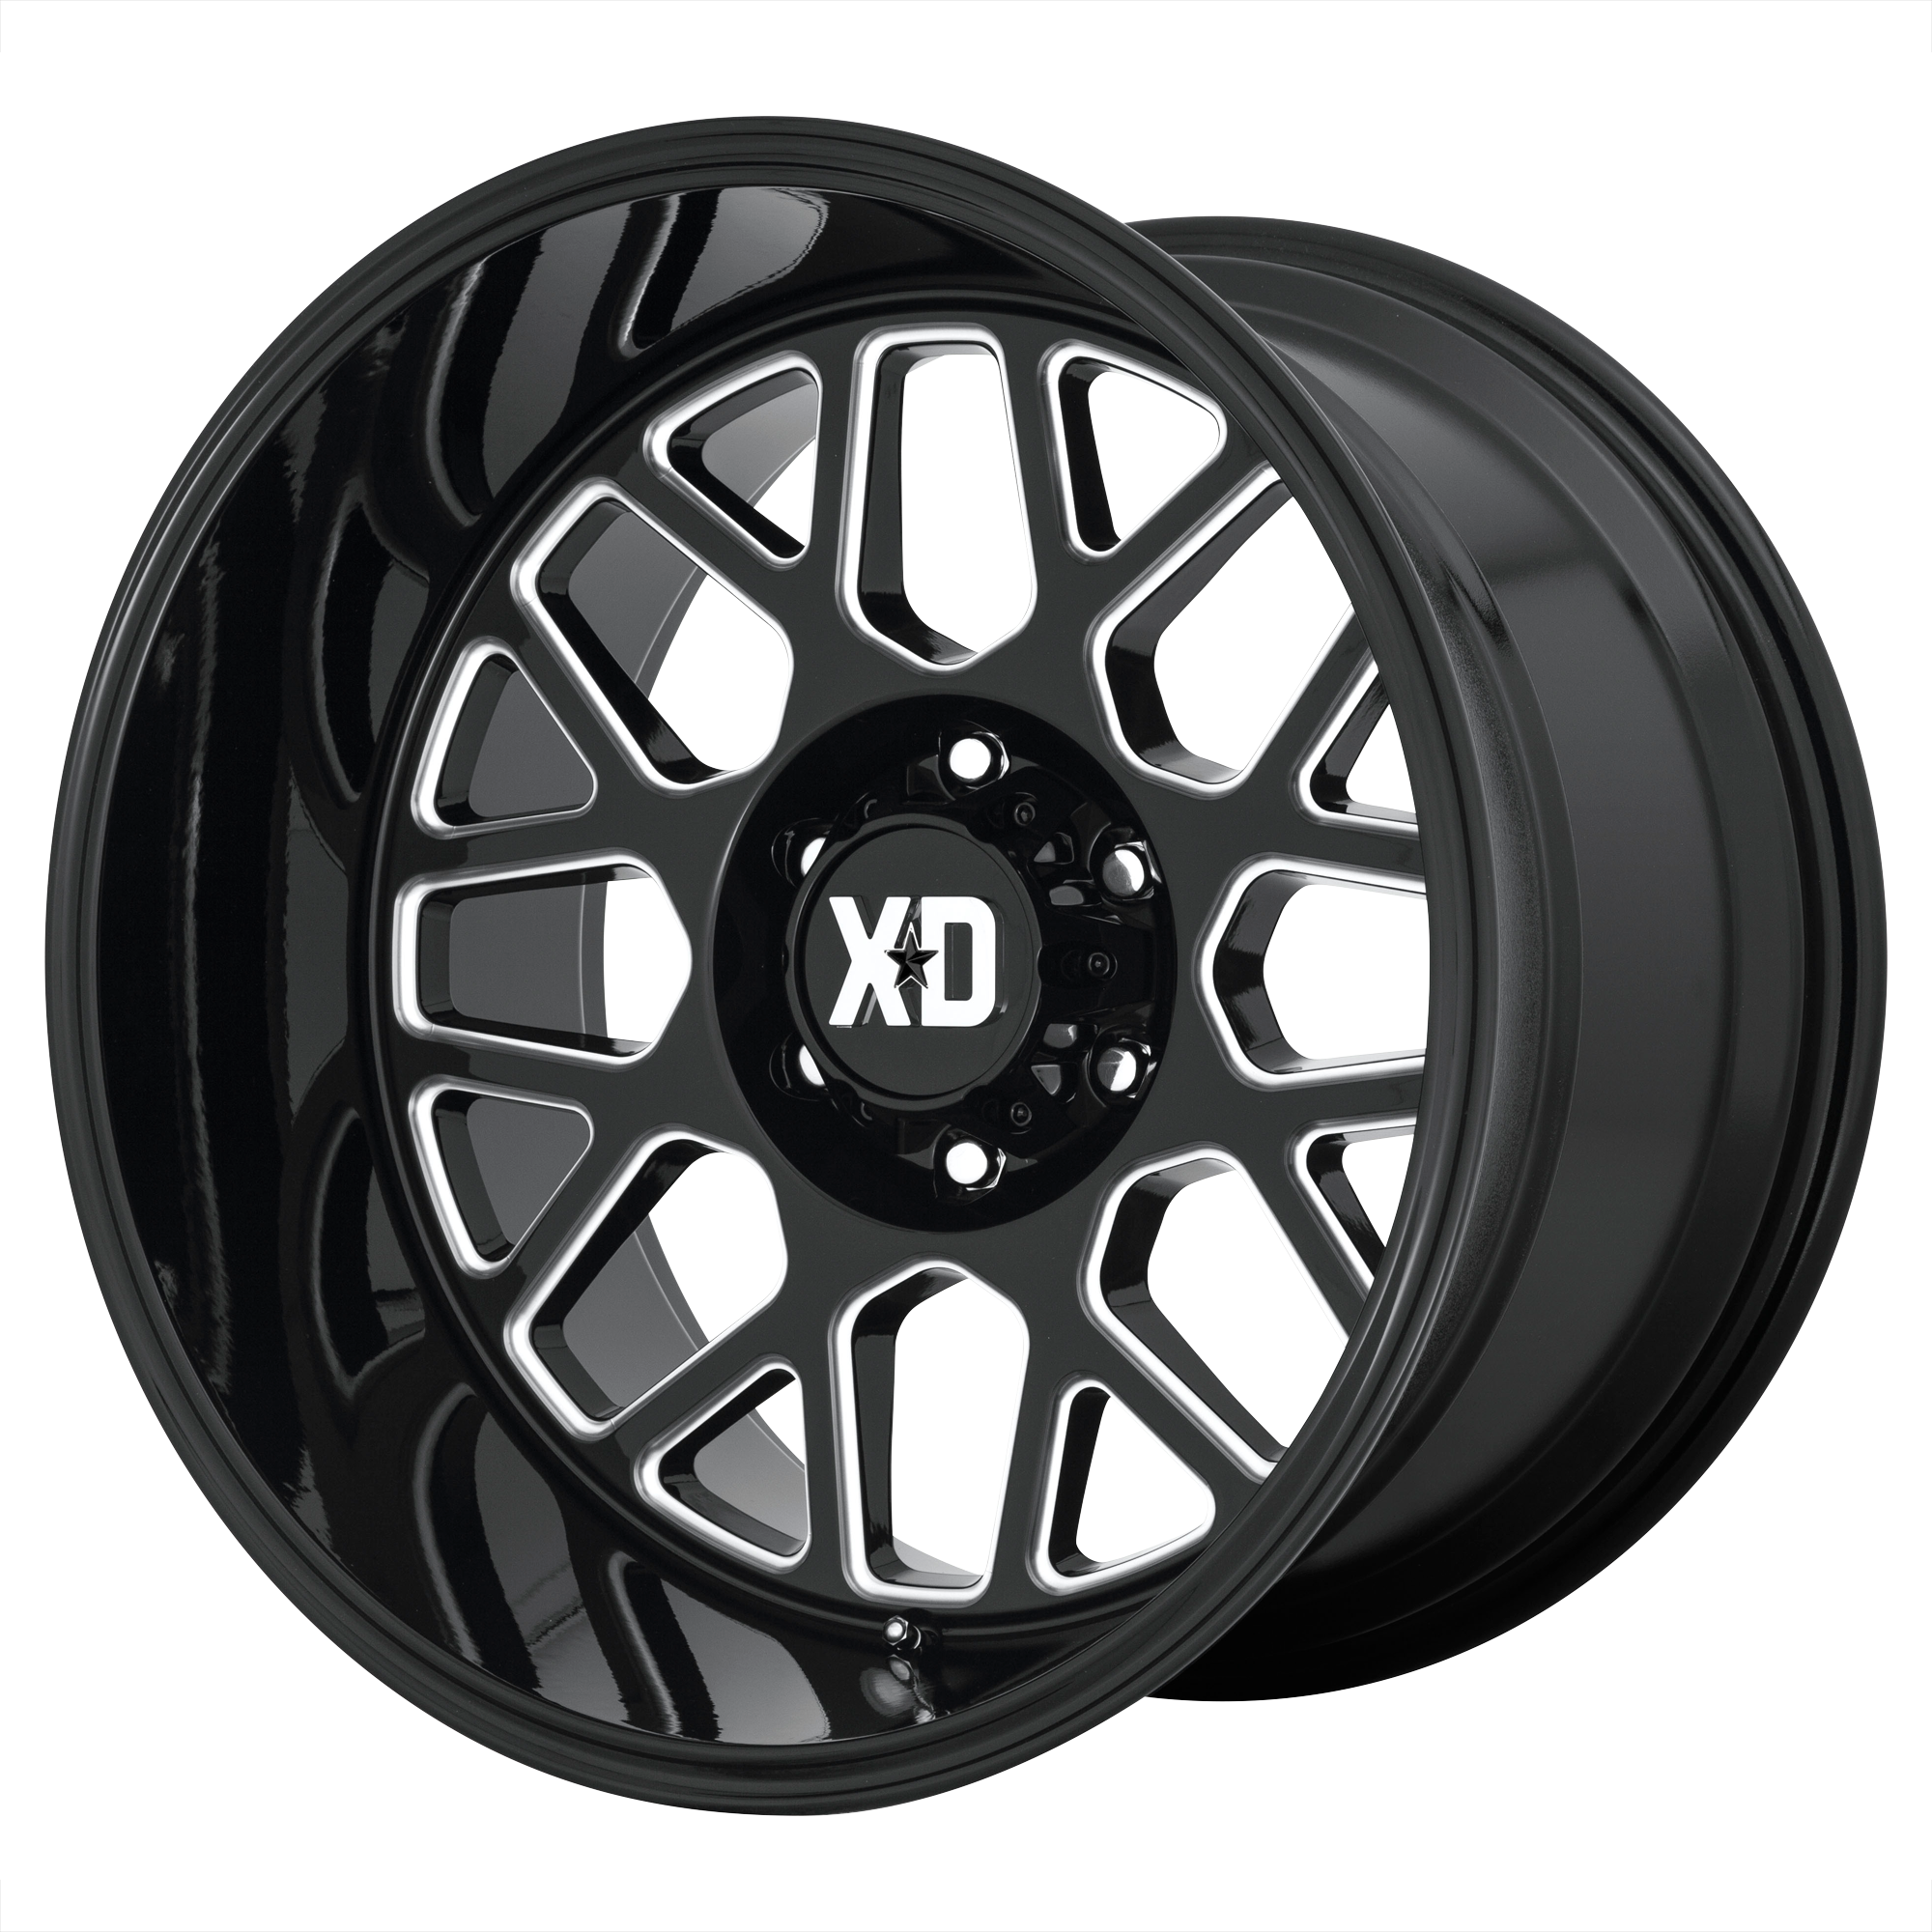 GRENADE 2 20x10 8x170.00 GLOSS BLACK MILLED (-18 mm) - Tires and Engine Performance